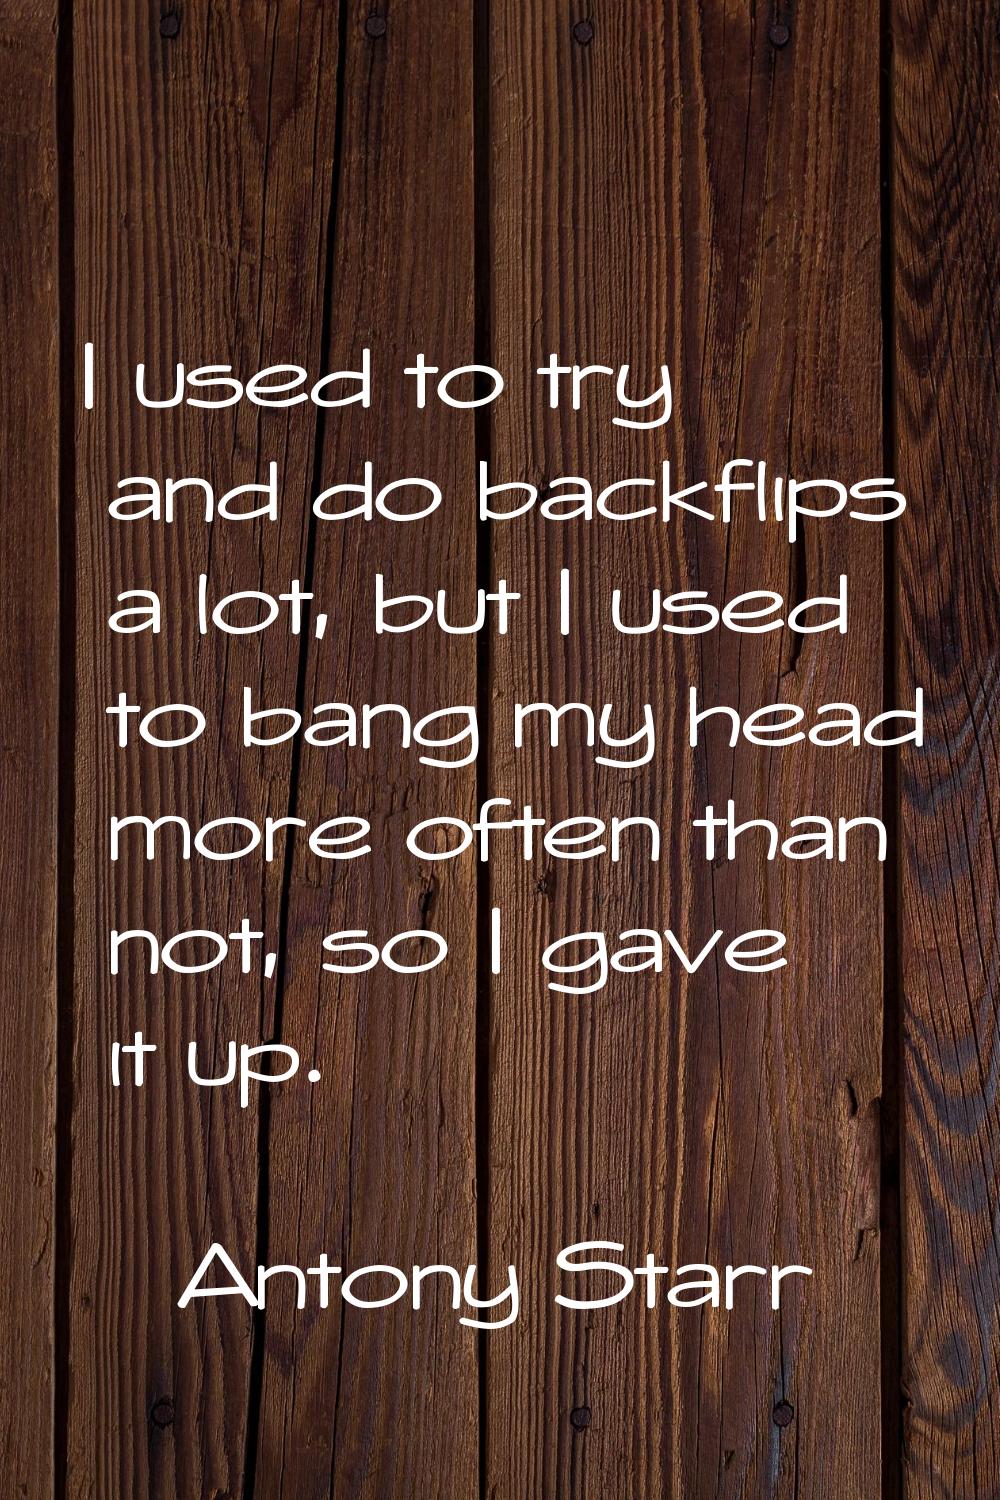 I used to try and do backflips a lot, but I used to bang my head more often than not, so I gave it 